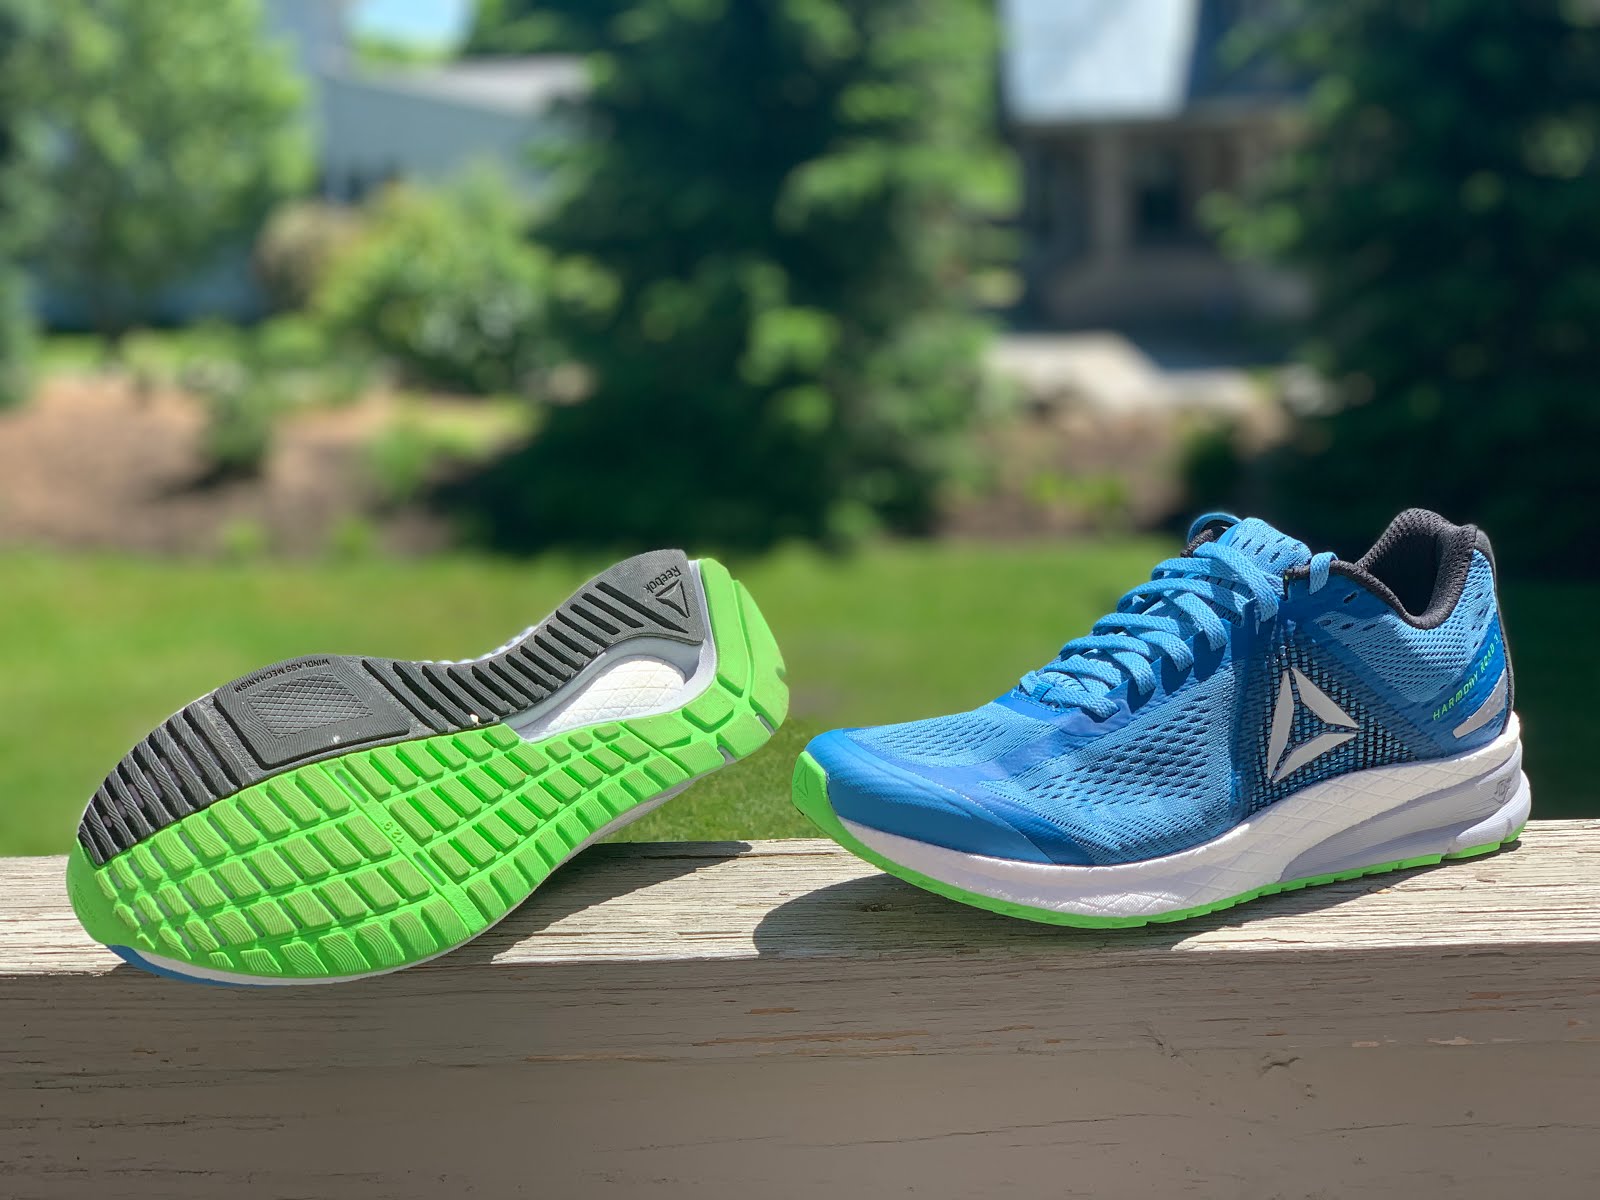 Road Trail Reebok Harmony Road 3 Initial Run with Details and Comparisons